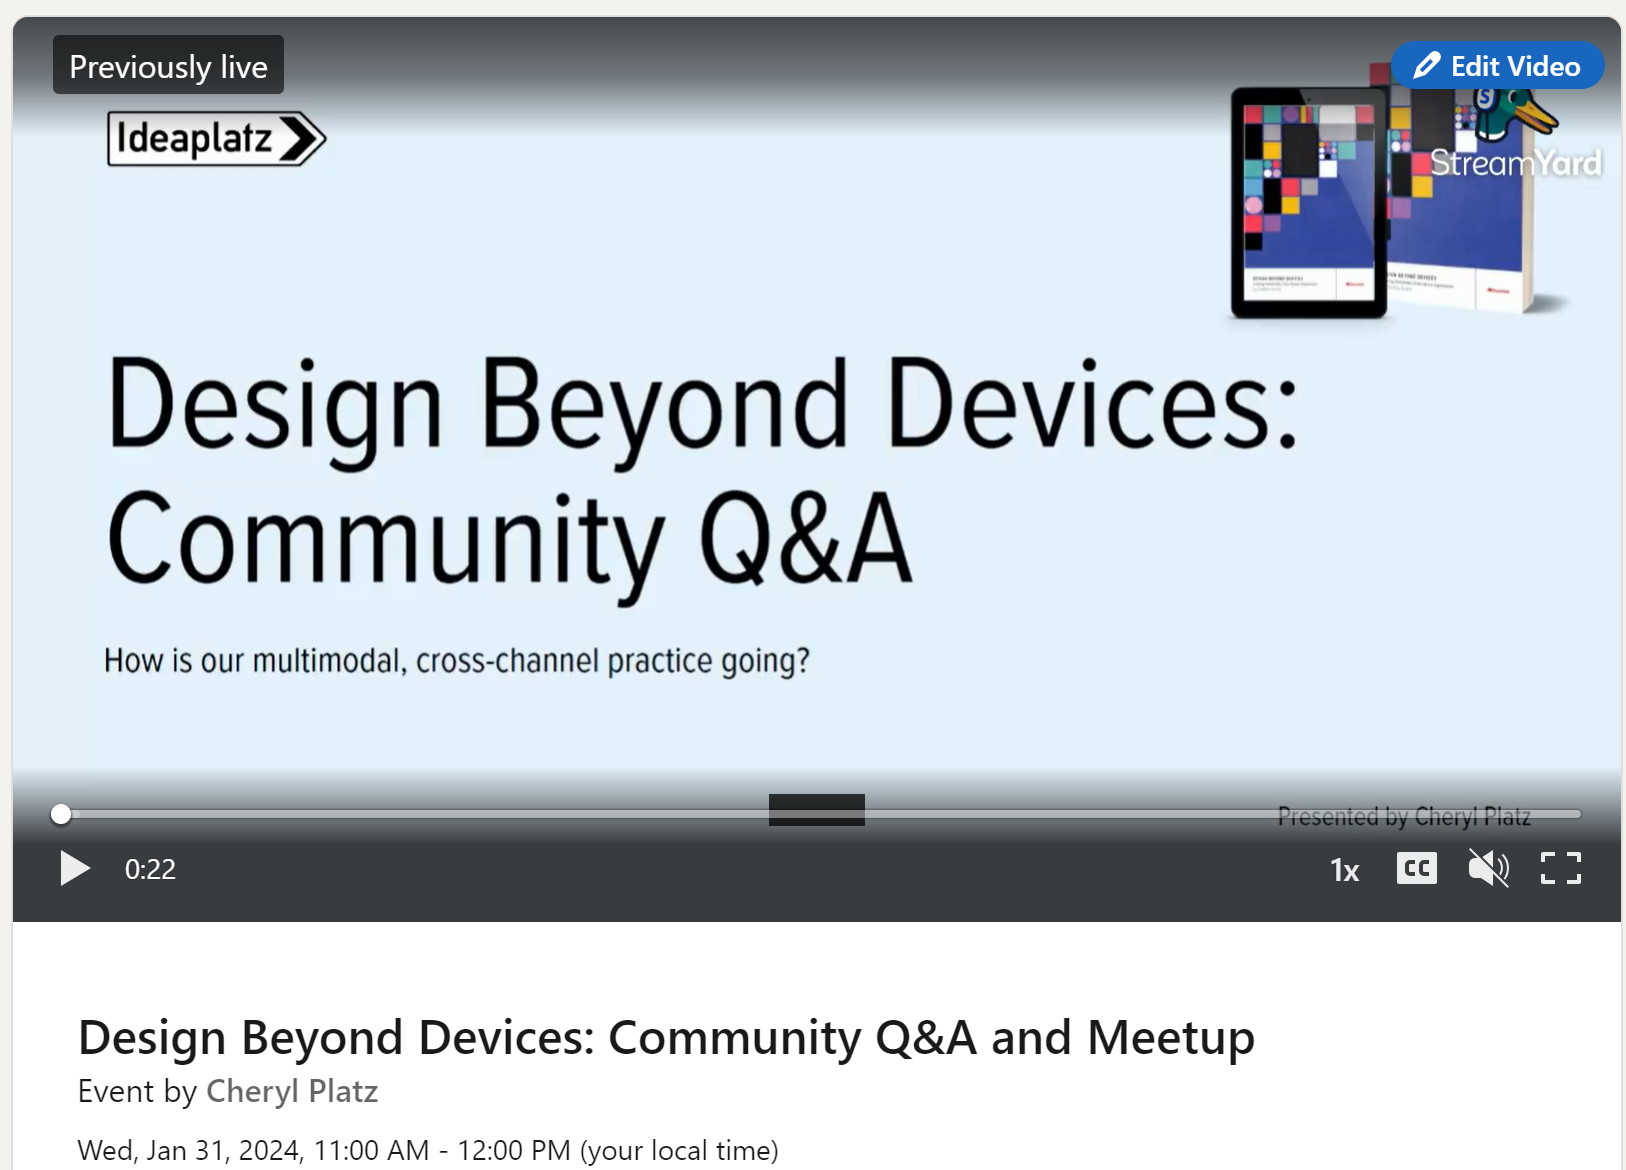 LinkedIn LIVE Recording Available: Design Beyond Devices Community Q&A